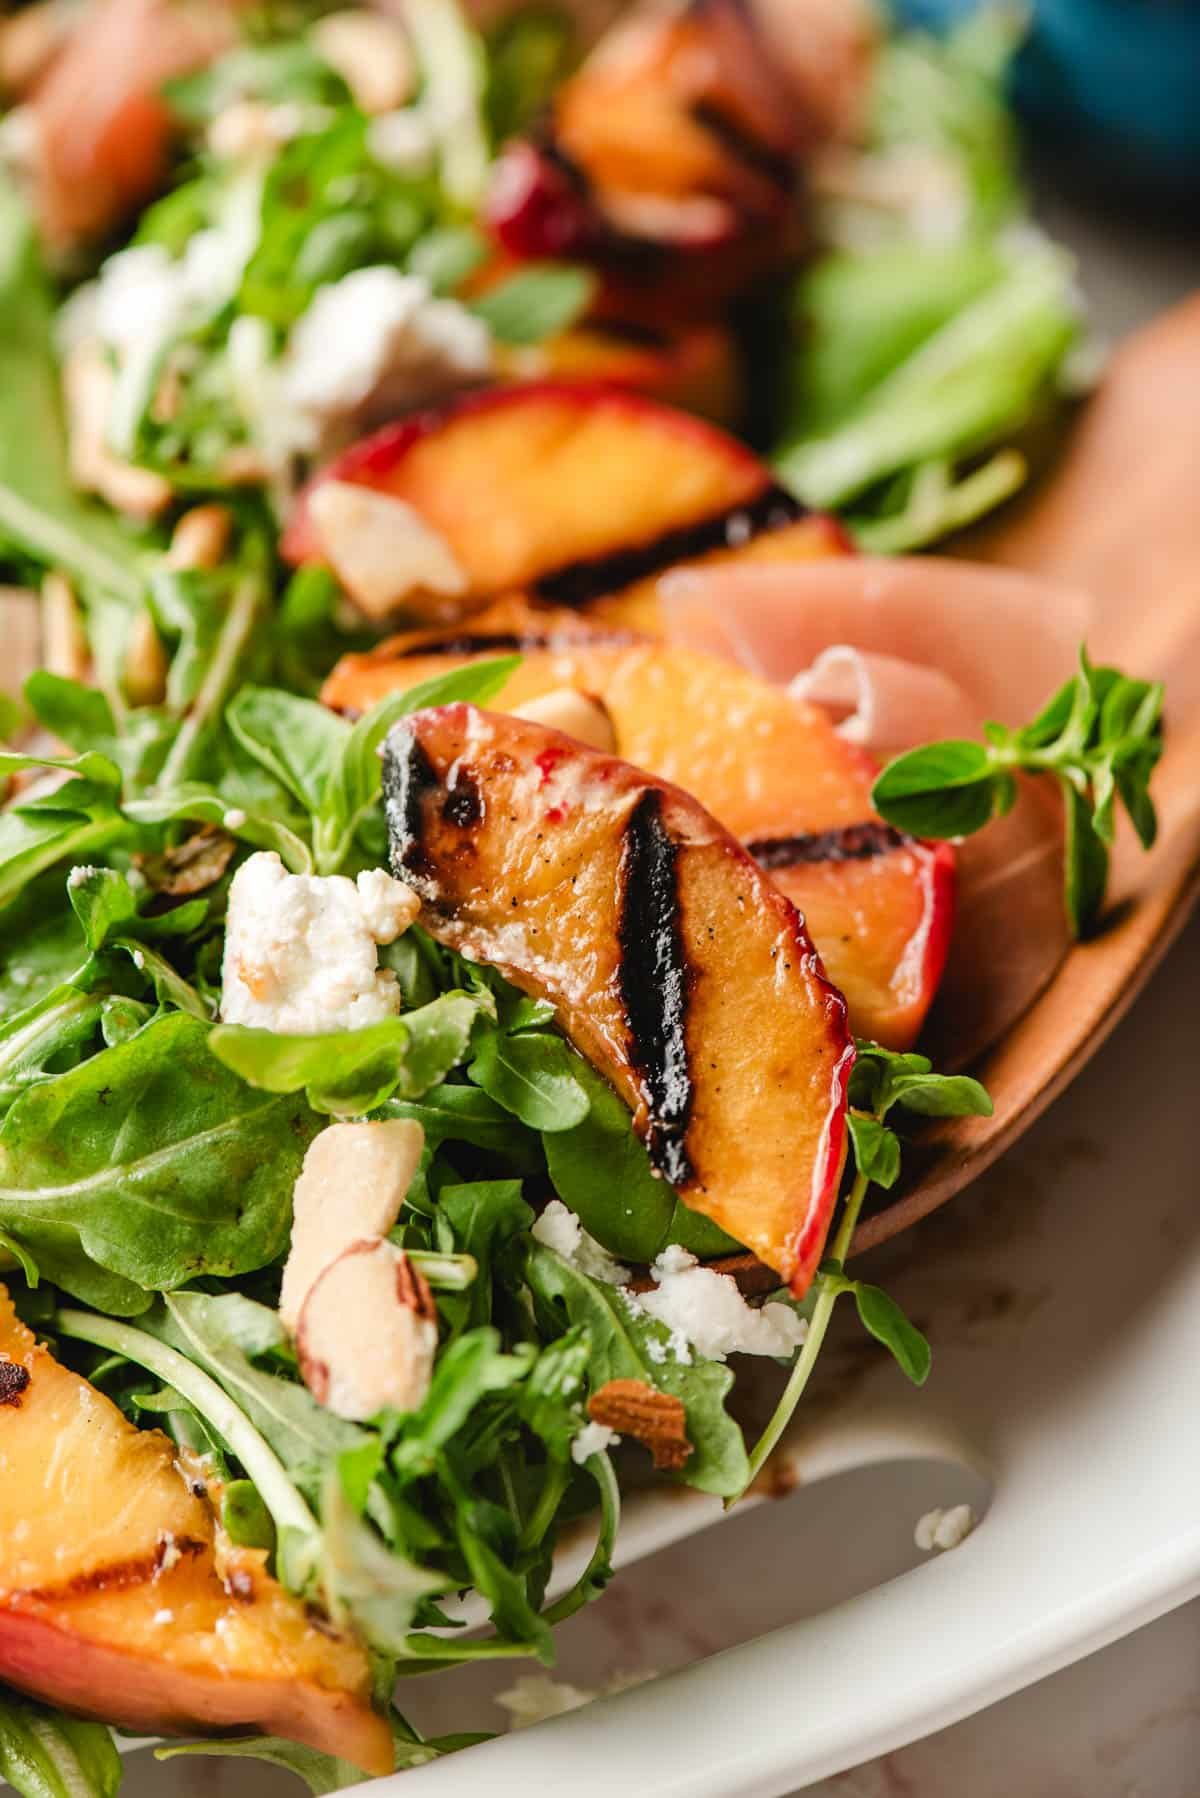 Scoop of grilled peach salad with goat cheese and almonds.